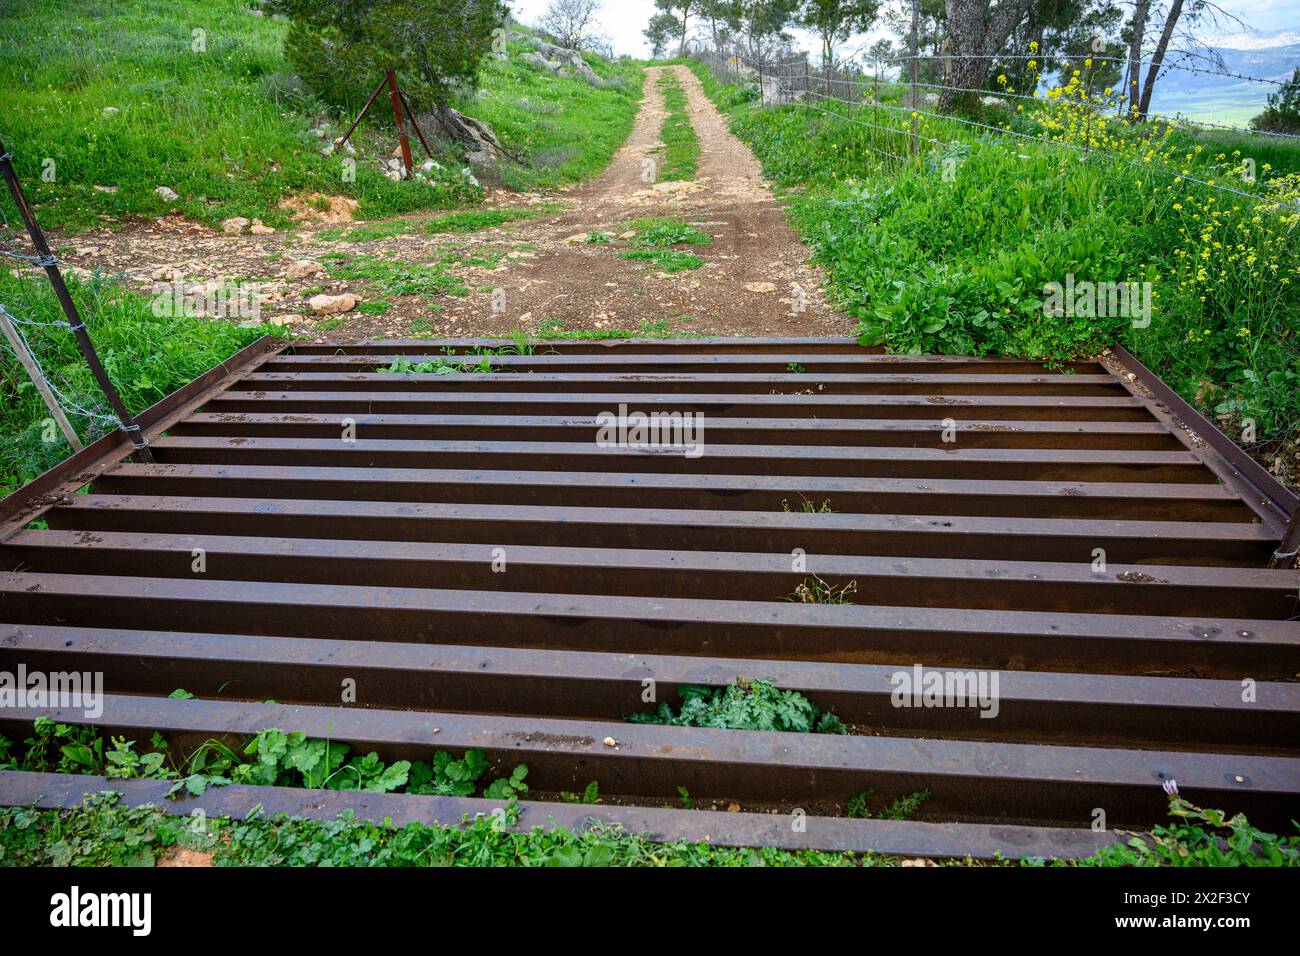 Cattle grid on a rural path Photographed at Givat Hamore, Jezreel Valley, Israel Stock Photo